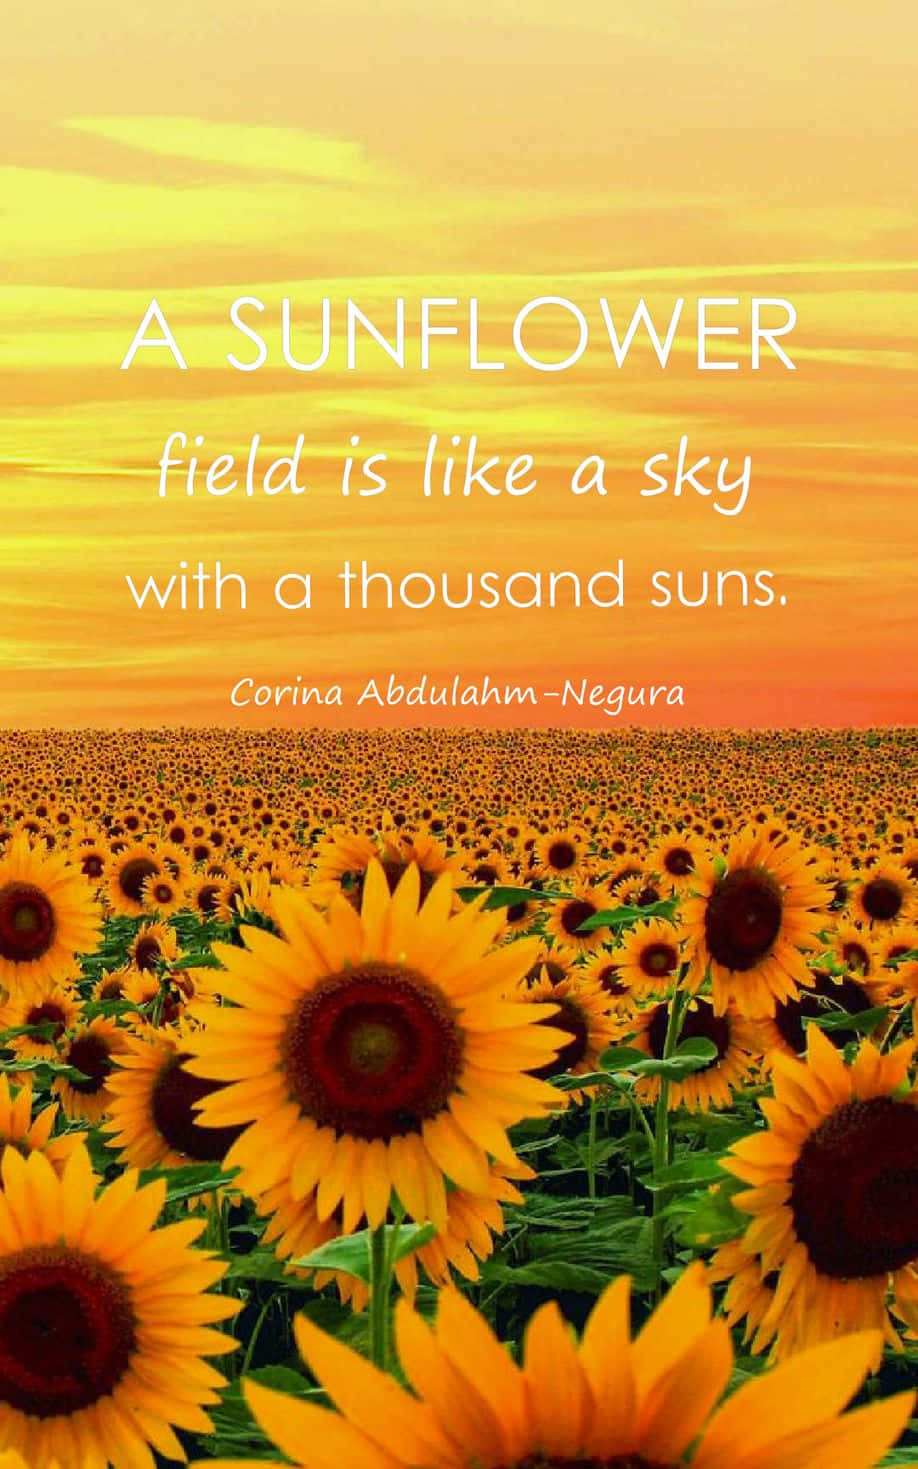 Find beauty and joy in the simplest of things - like sunflowers. Wallpaper